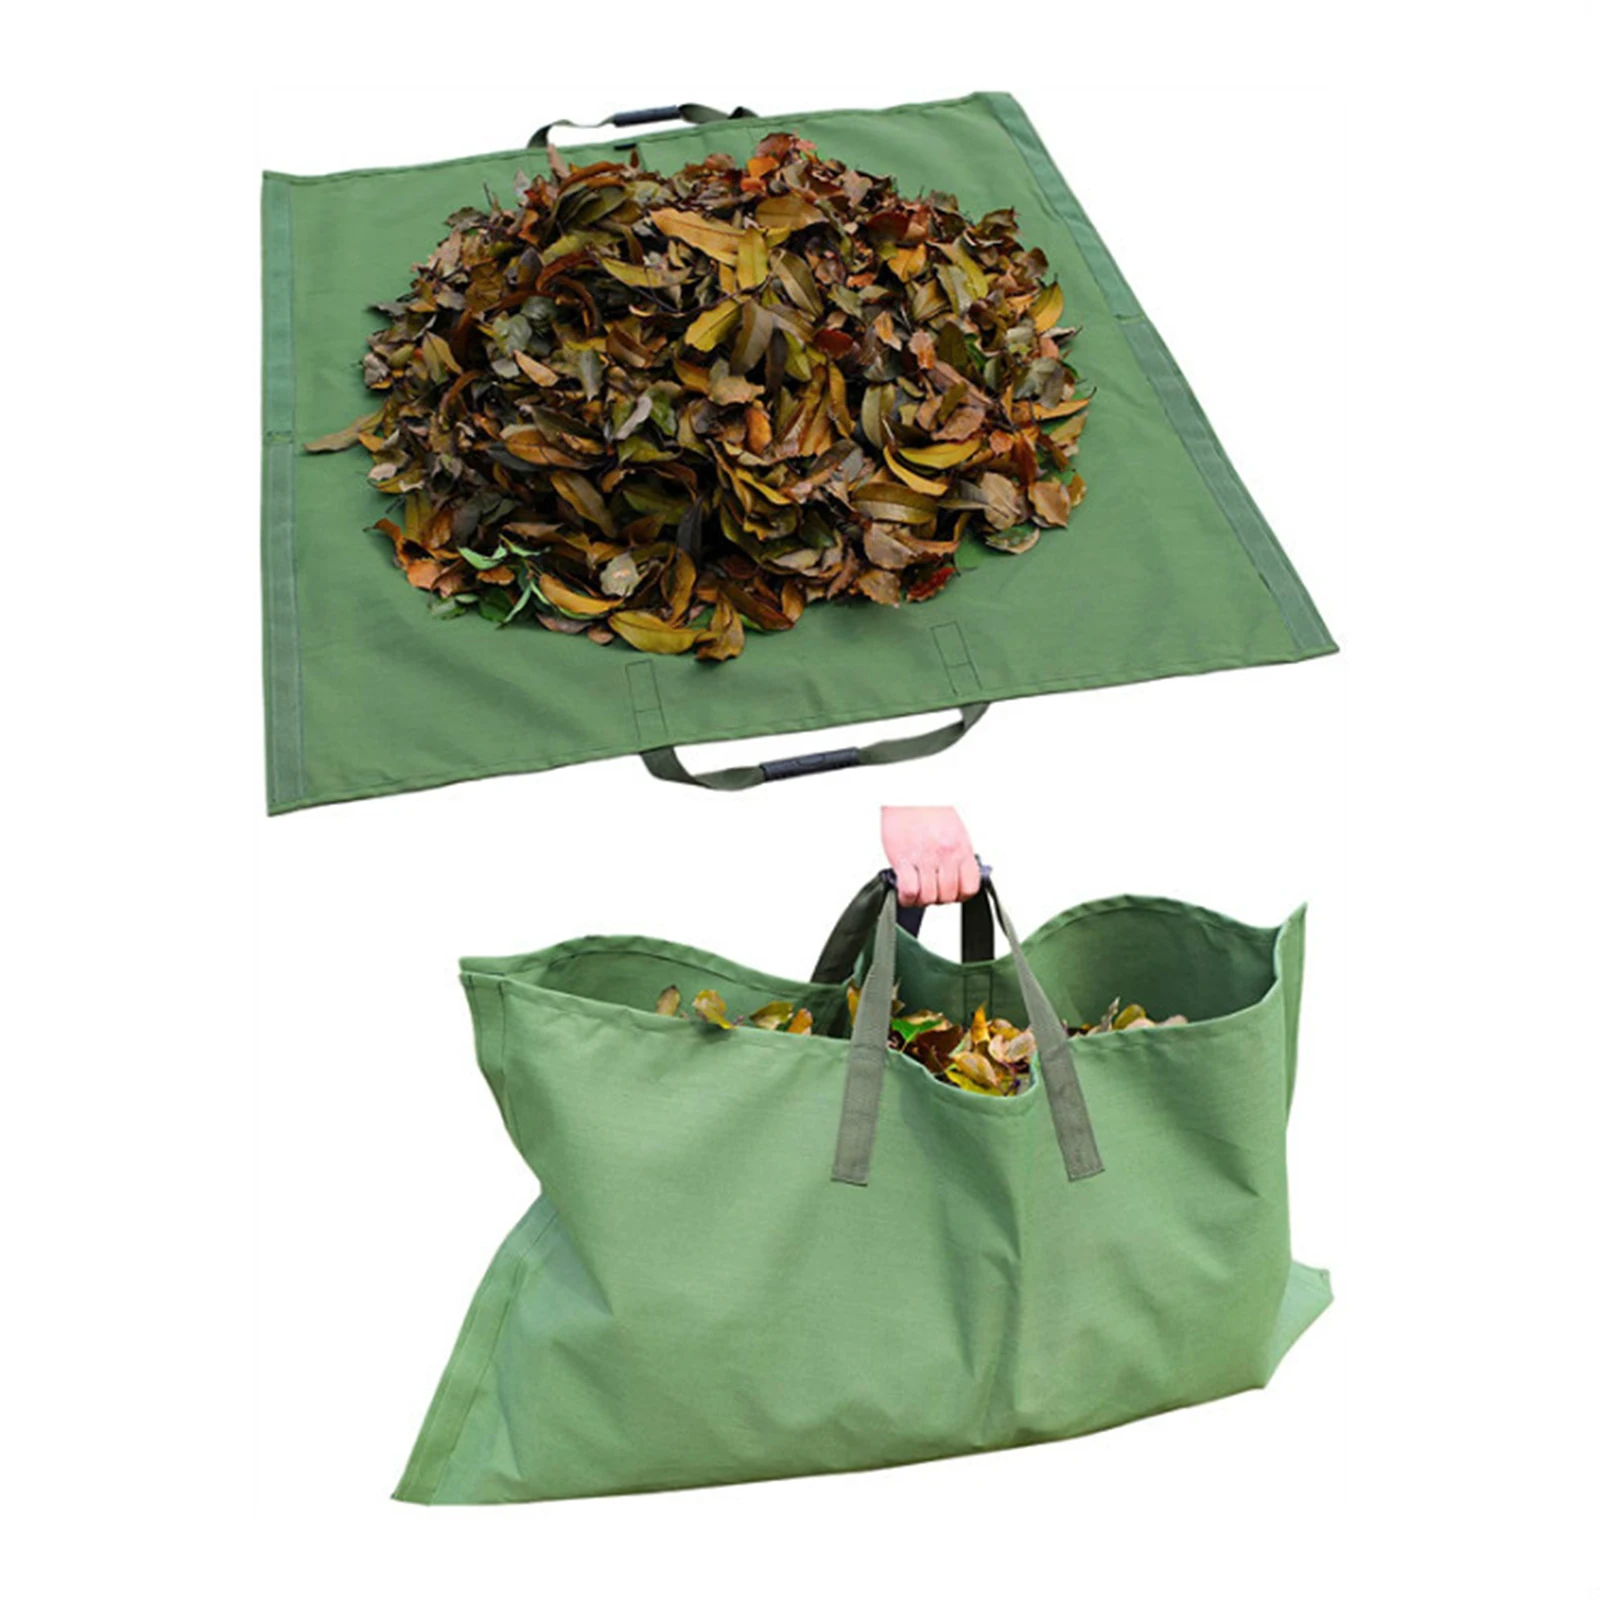 

2 in 1 Leaves Storage Bag Multipurpose Heavy Duty Trash Collecting Mat Reusable Canvas Bag for Garden Courtyard Lawn ALS88